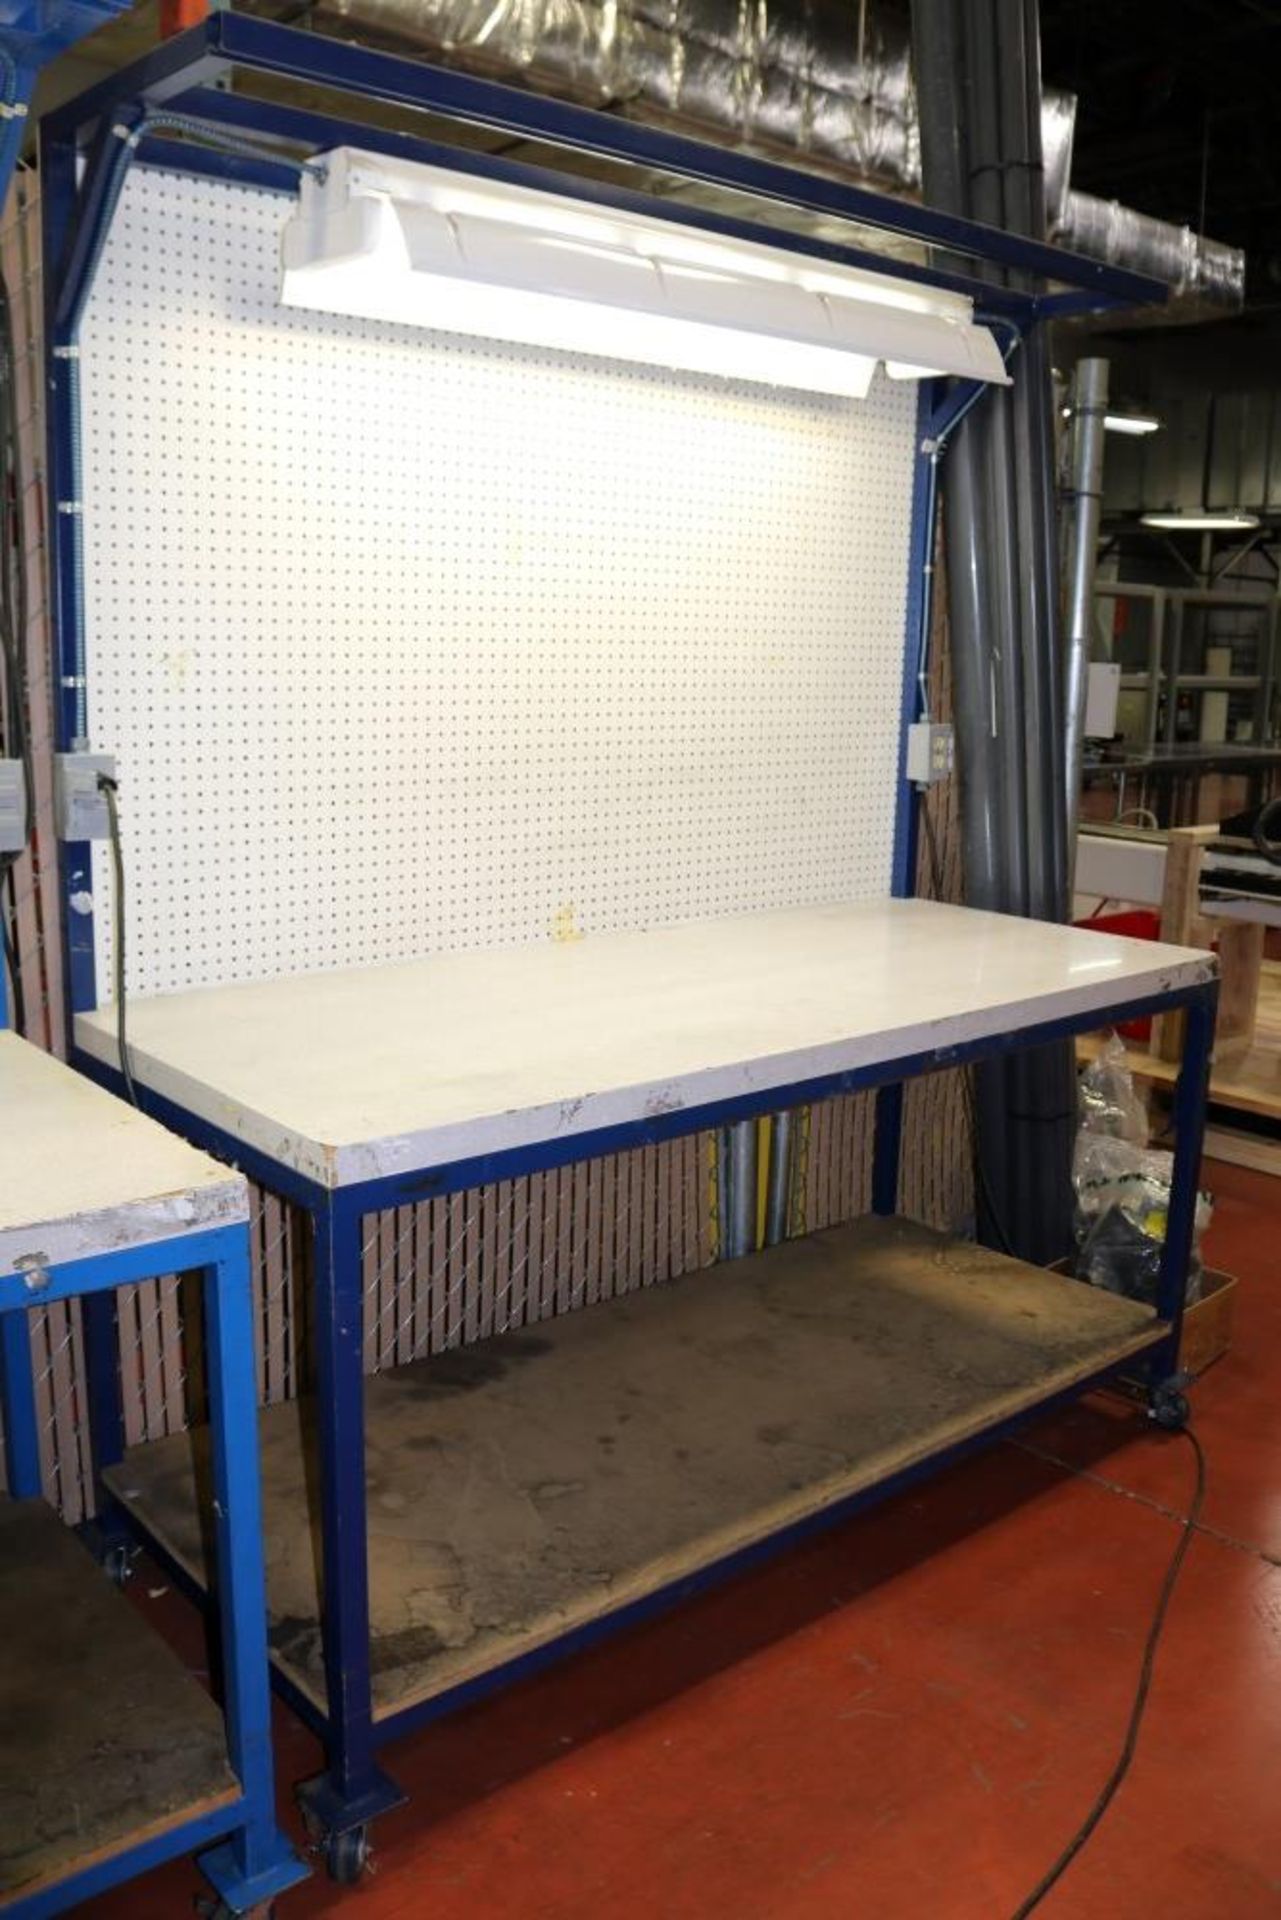 Work Station - 30" x 36" x 72" Rolling Workbench w/ 4' x 6' pegboard backing and 4' Shop Light - Image 2 of 8